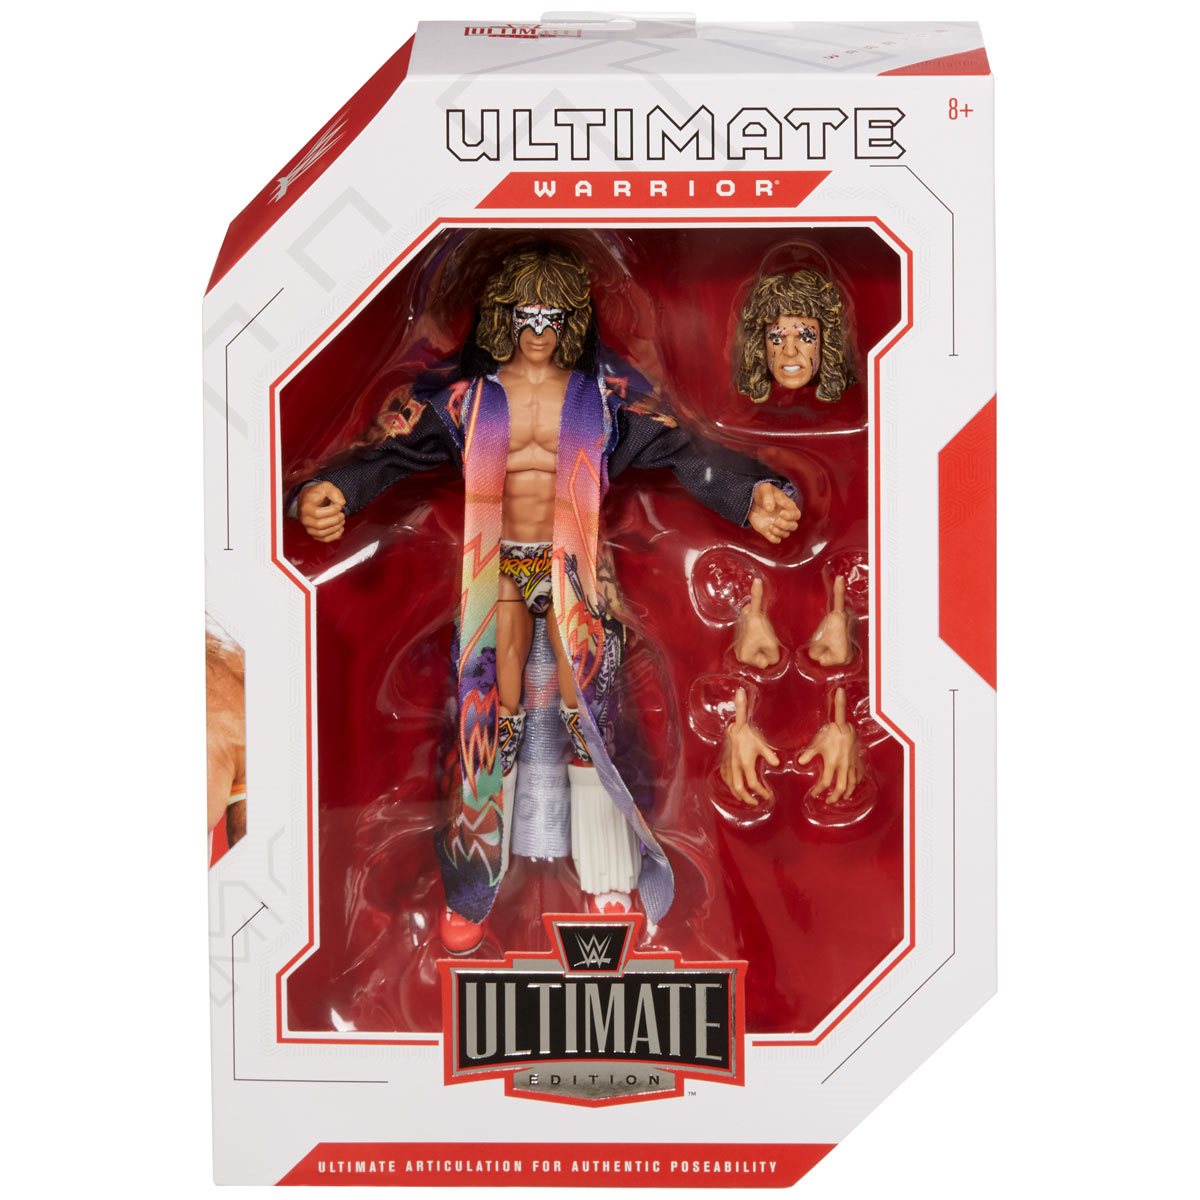 Ultimate warrior in a box front view - Heretoserveyou